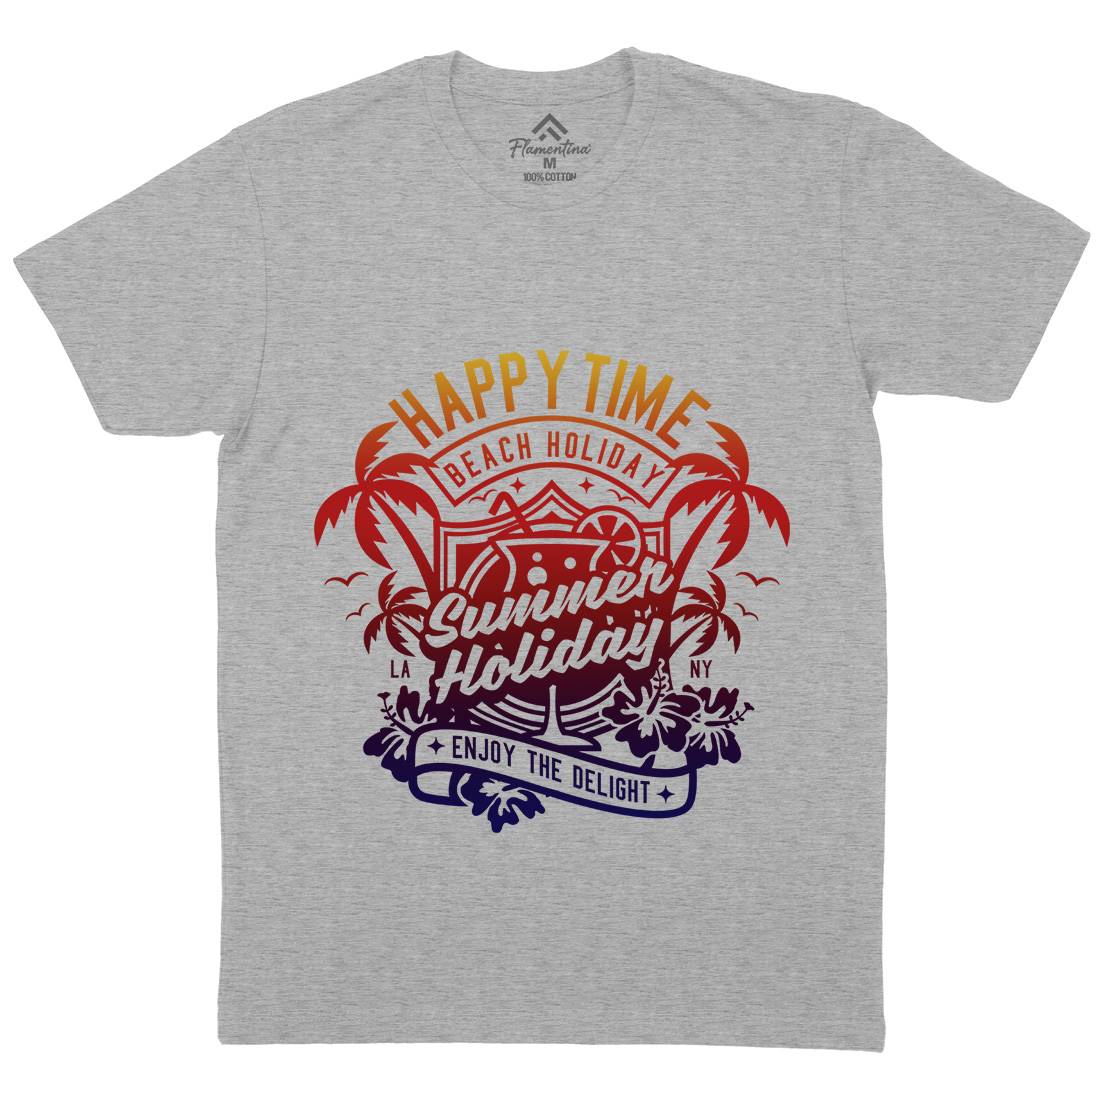 Happy Time Mens Organic Crew Neck T-Shirt Surf A238